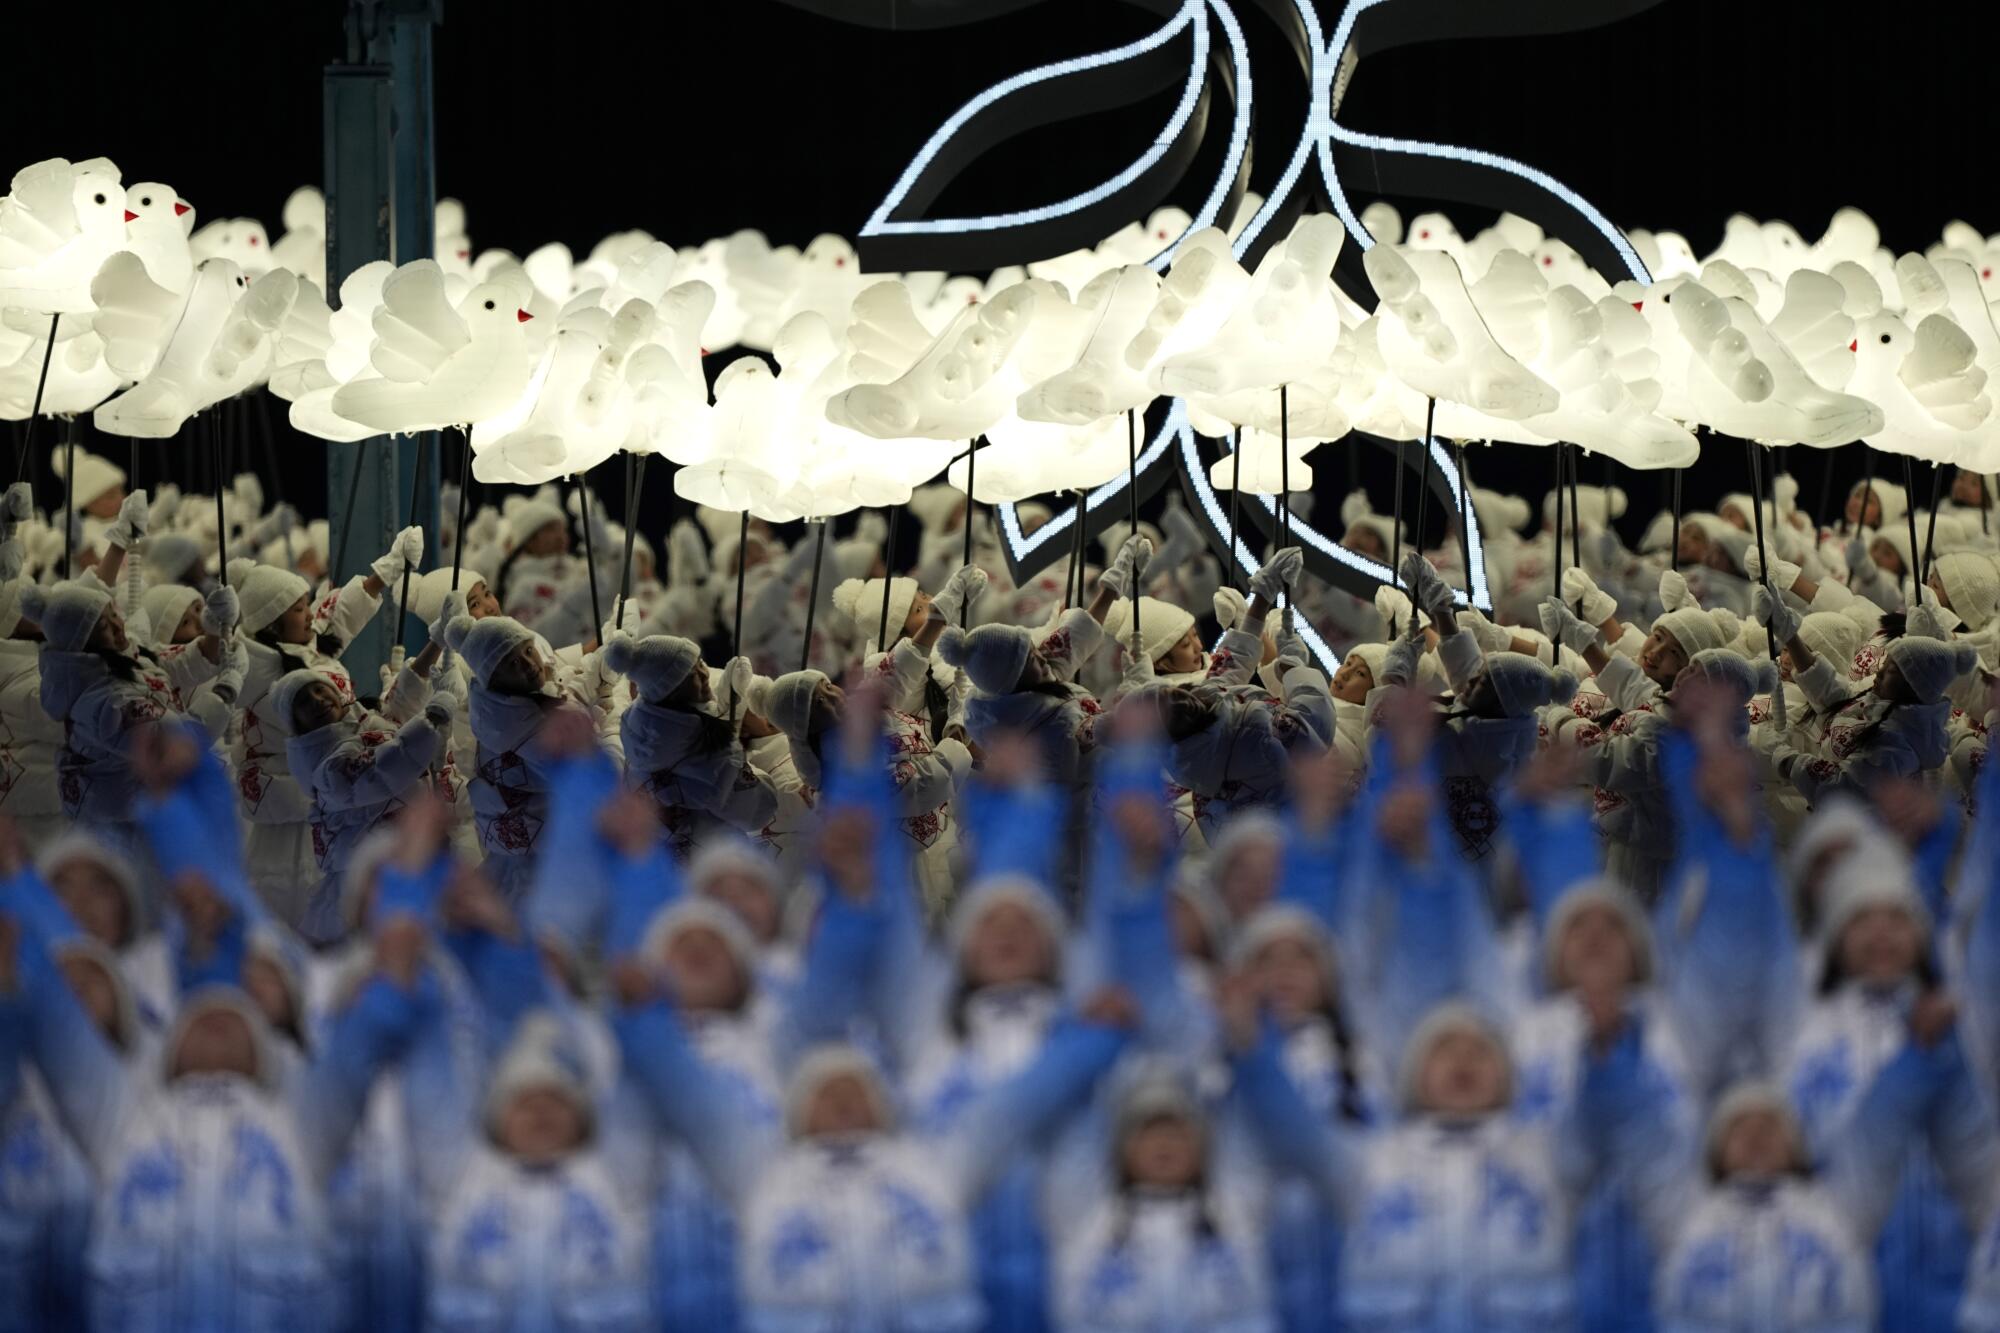 Children hold up images of doves during the opening ceremony.